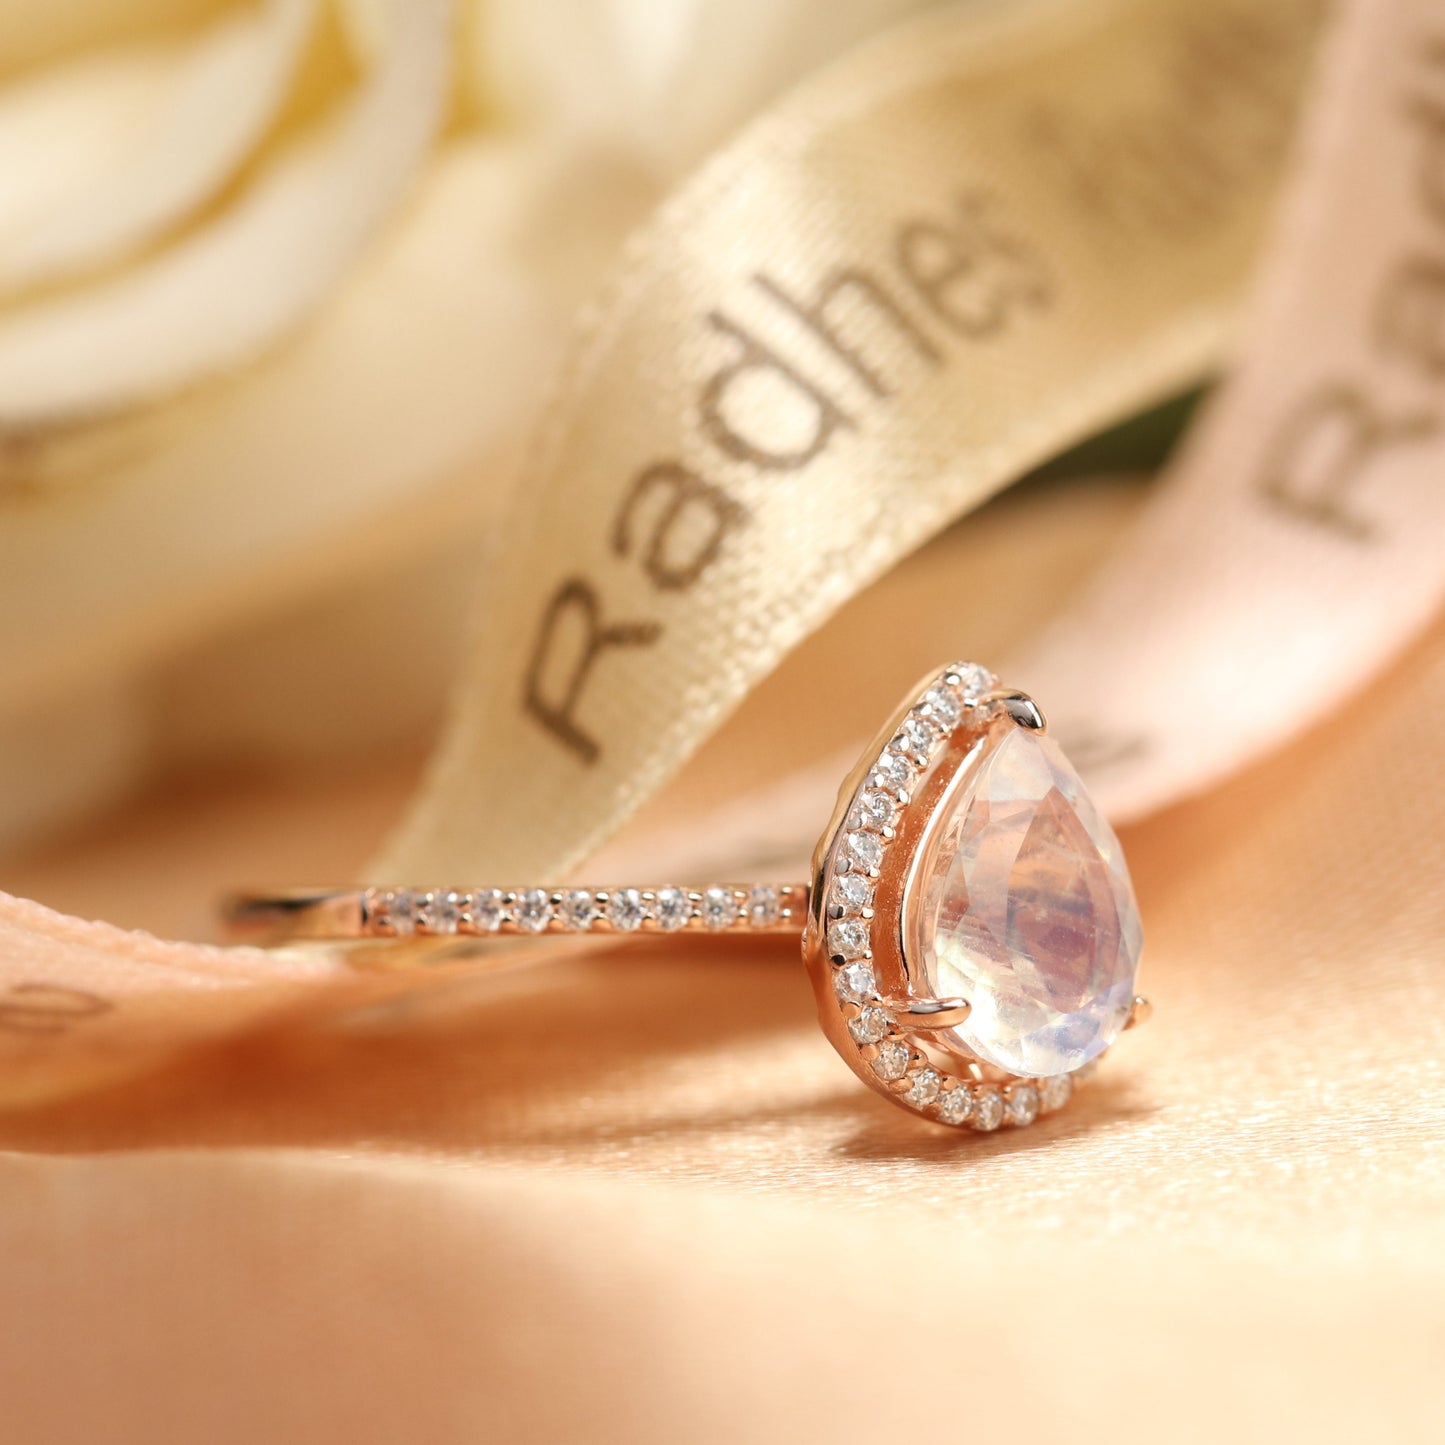 Classic 1.5 carat Tear Drop Shape Moonstone Promise Ring for Her in Rose Gold